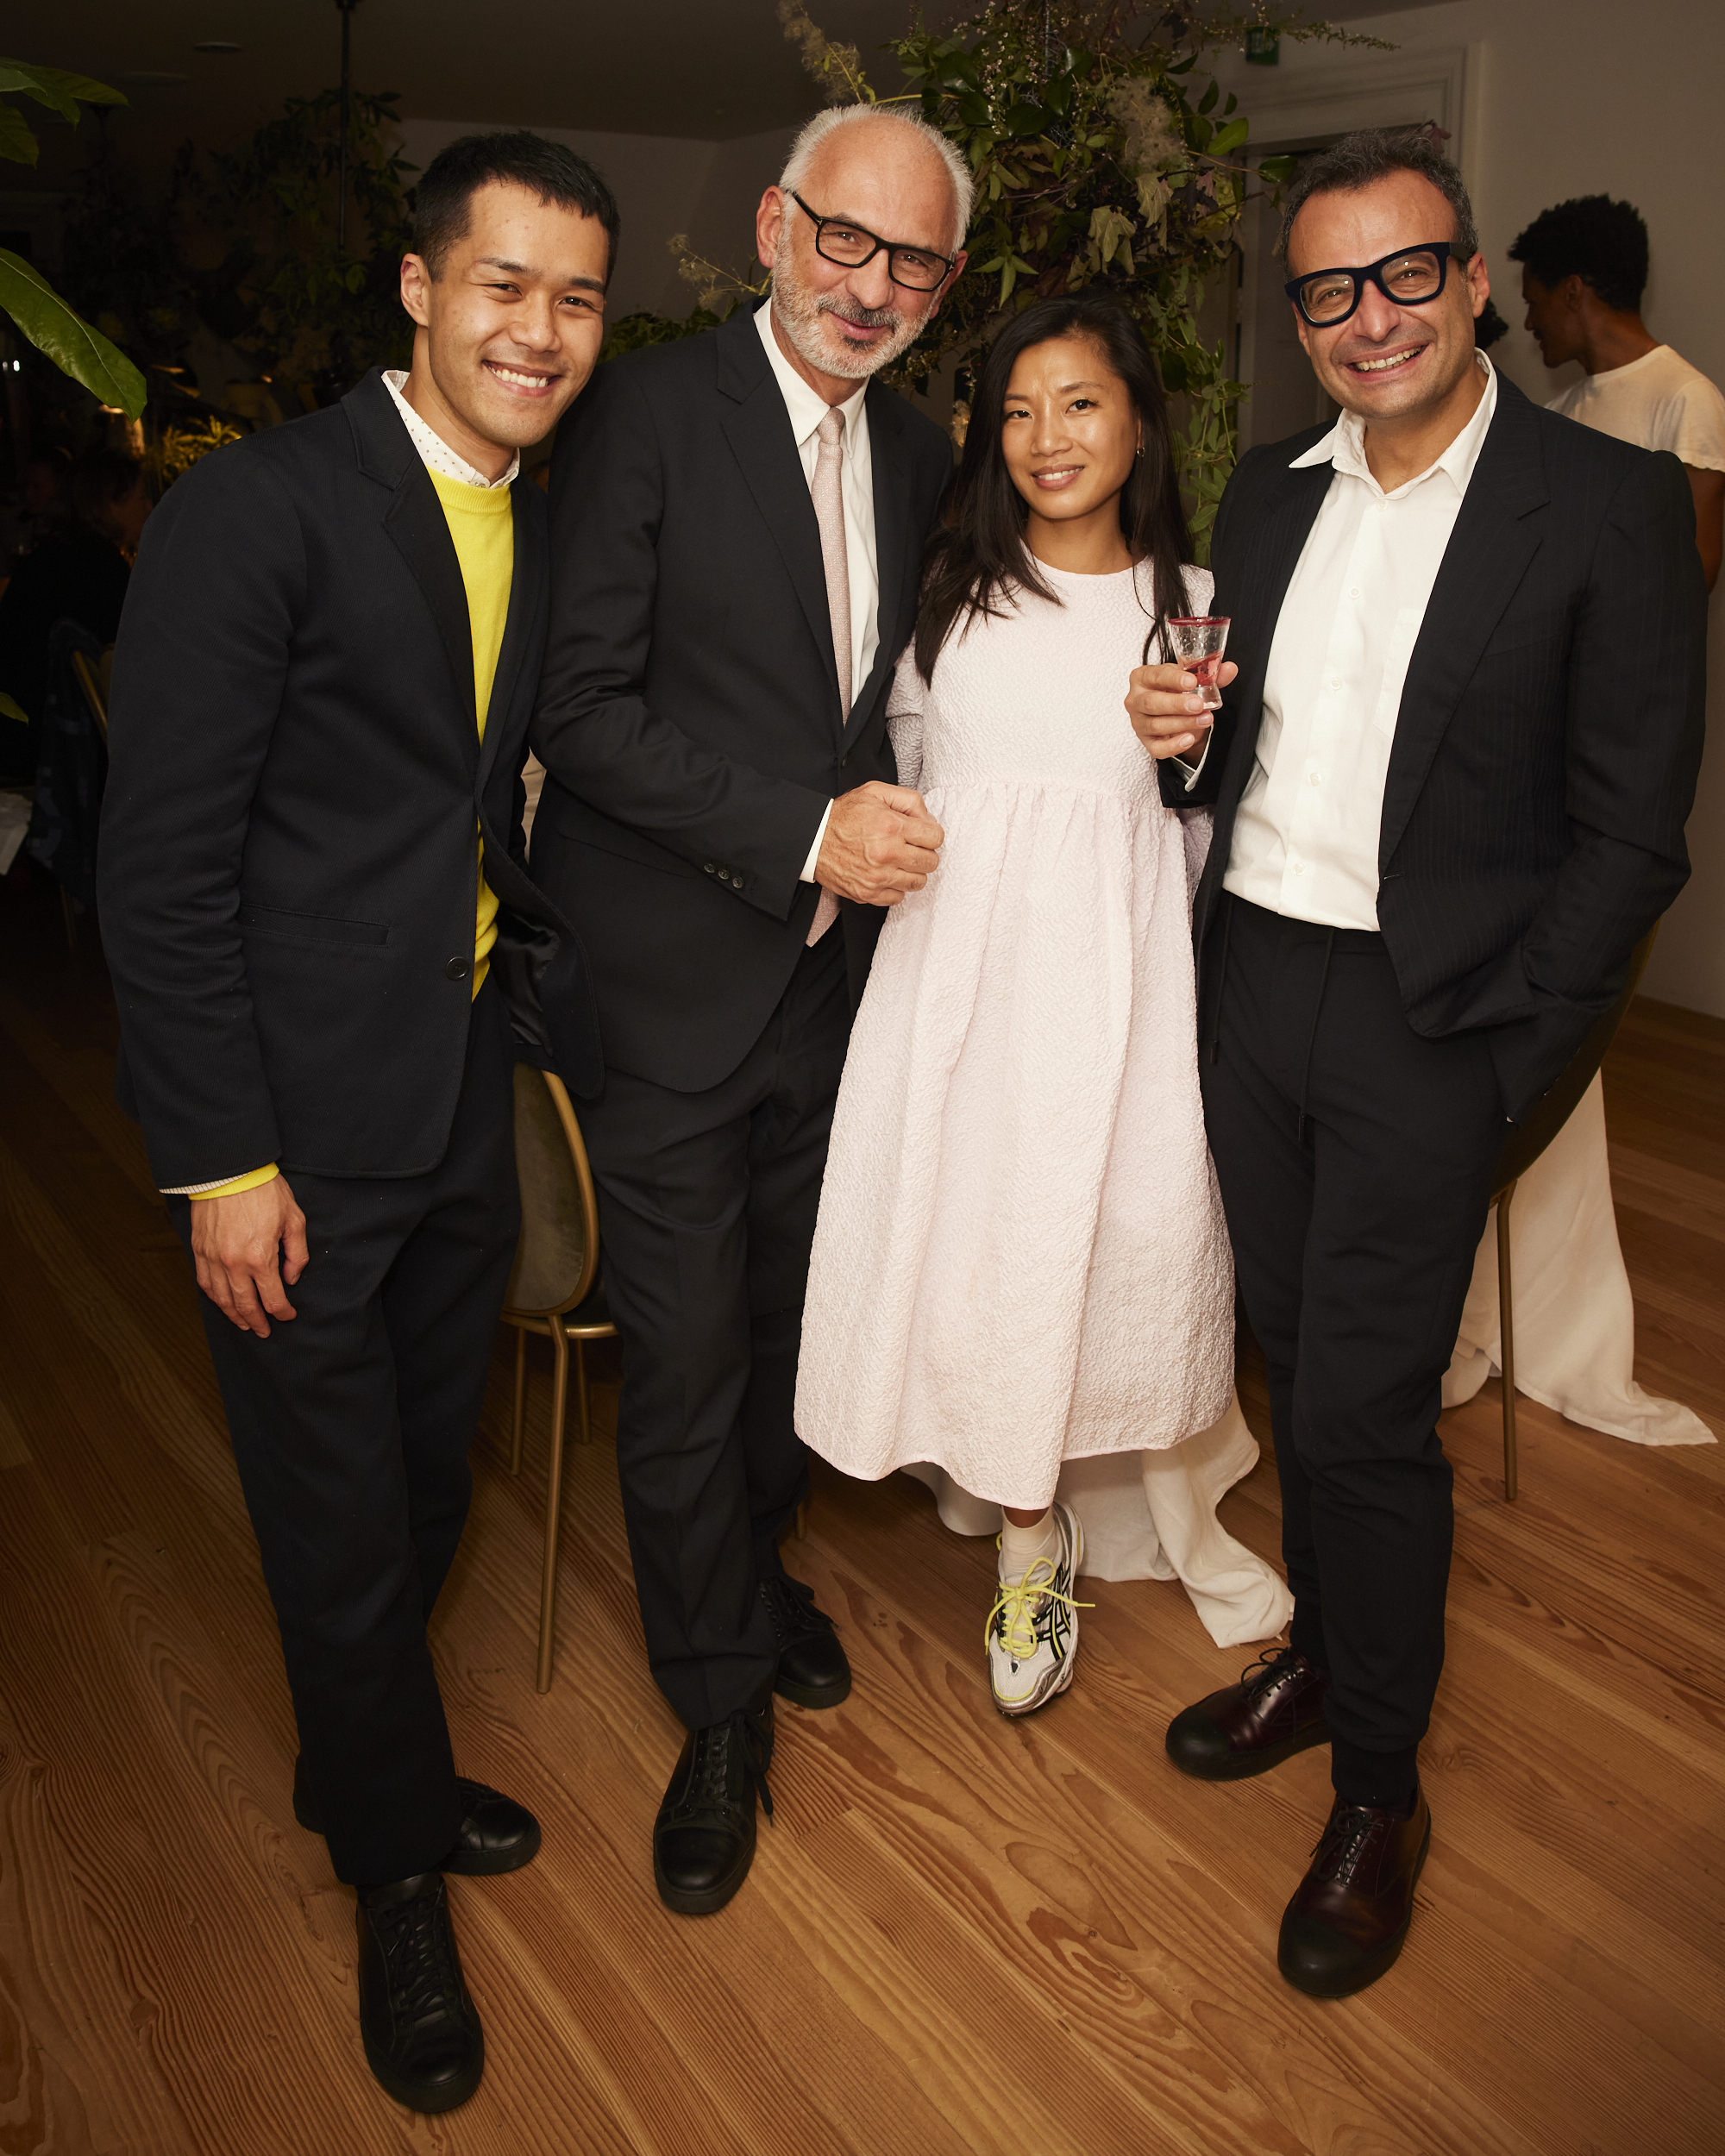 Wallpaper’s editor,  Matchesfashion CEOs and designers at Xmuse event